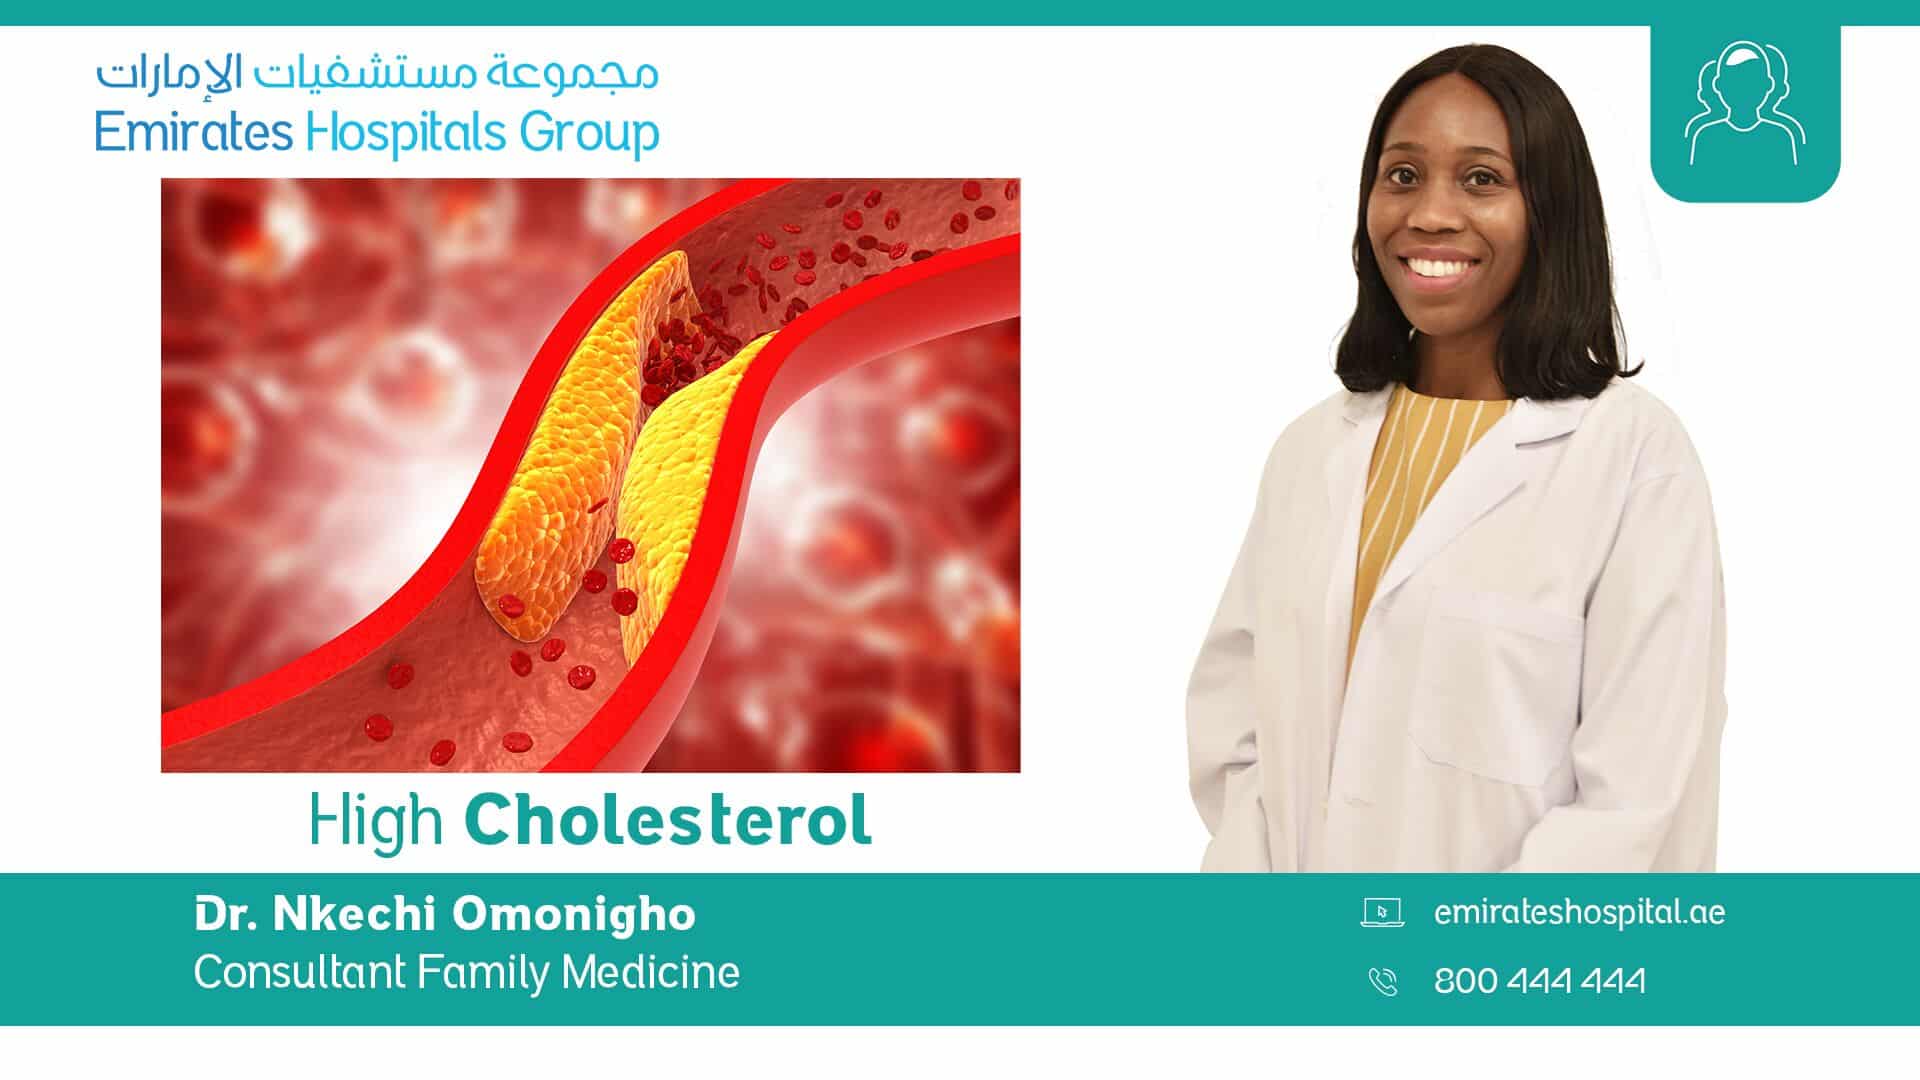 High Cholesterol, usually has no signs or symptoms | Dr. Nkechi Omonigho, Consultant Family Medicine